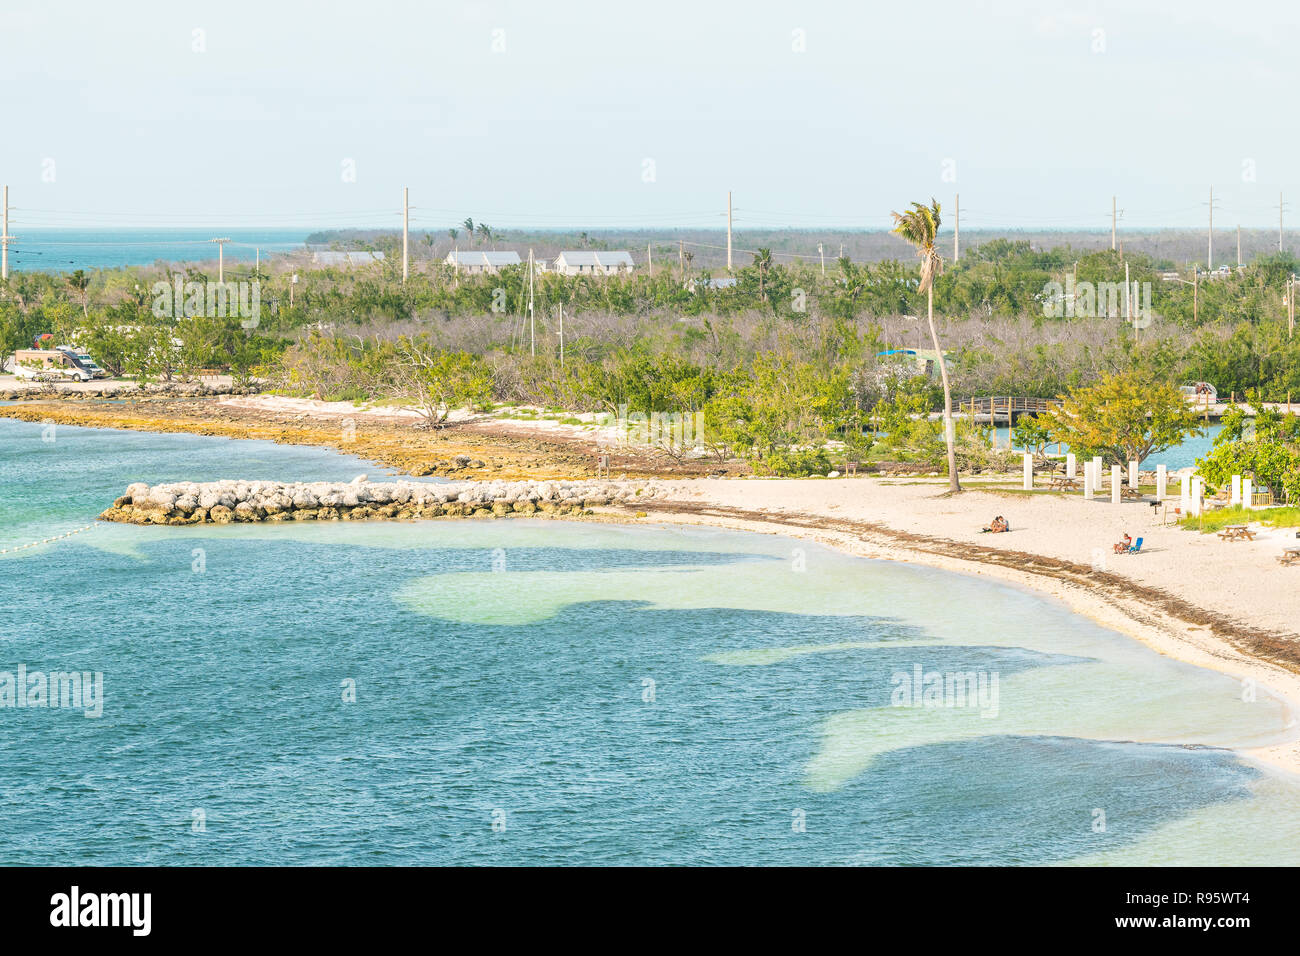 Bahia Honda Key, USA - May 1, 2018: Florida state park in island with shore, coast, sand beach, people sitting on chairs after hurricane irma destruct Stock Photo